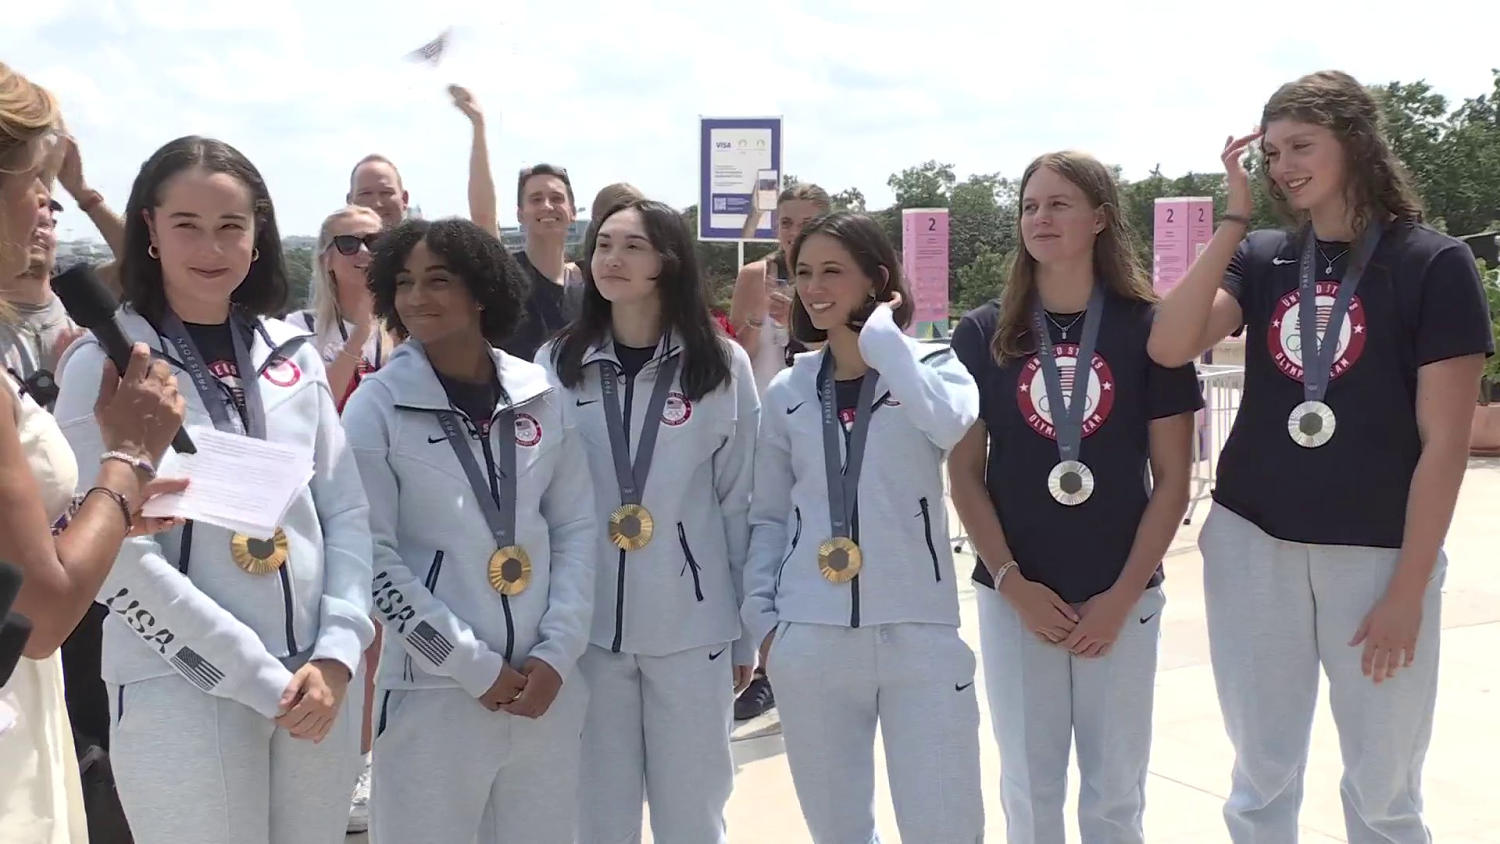 Team USA swimmers and fencers talk medals on TODAY